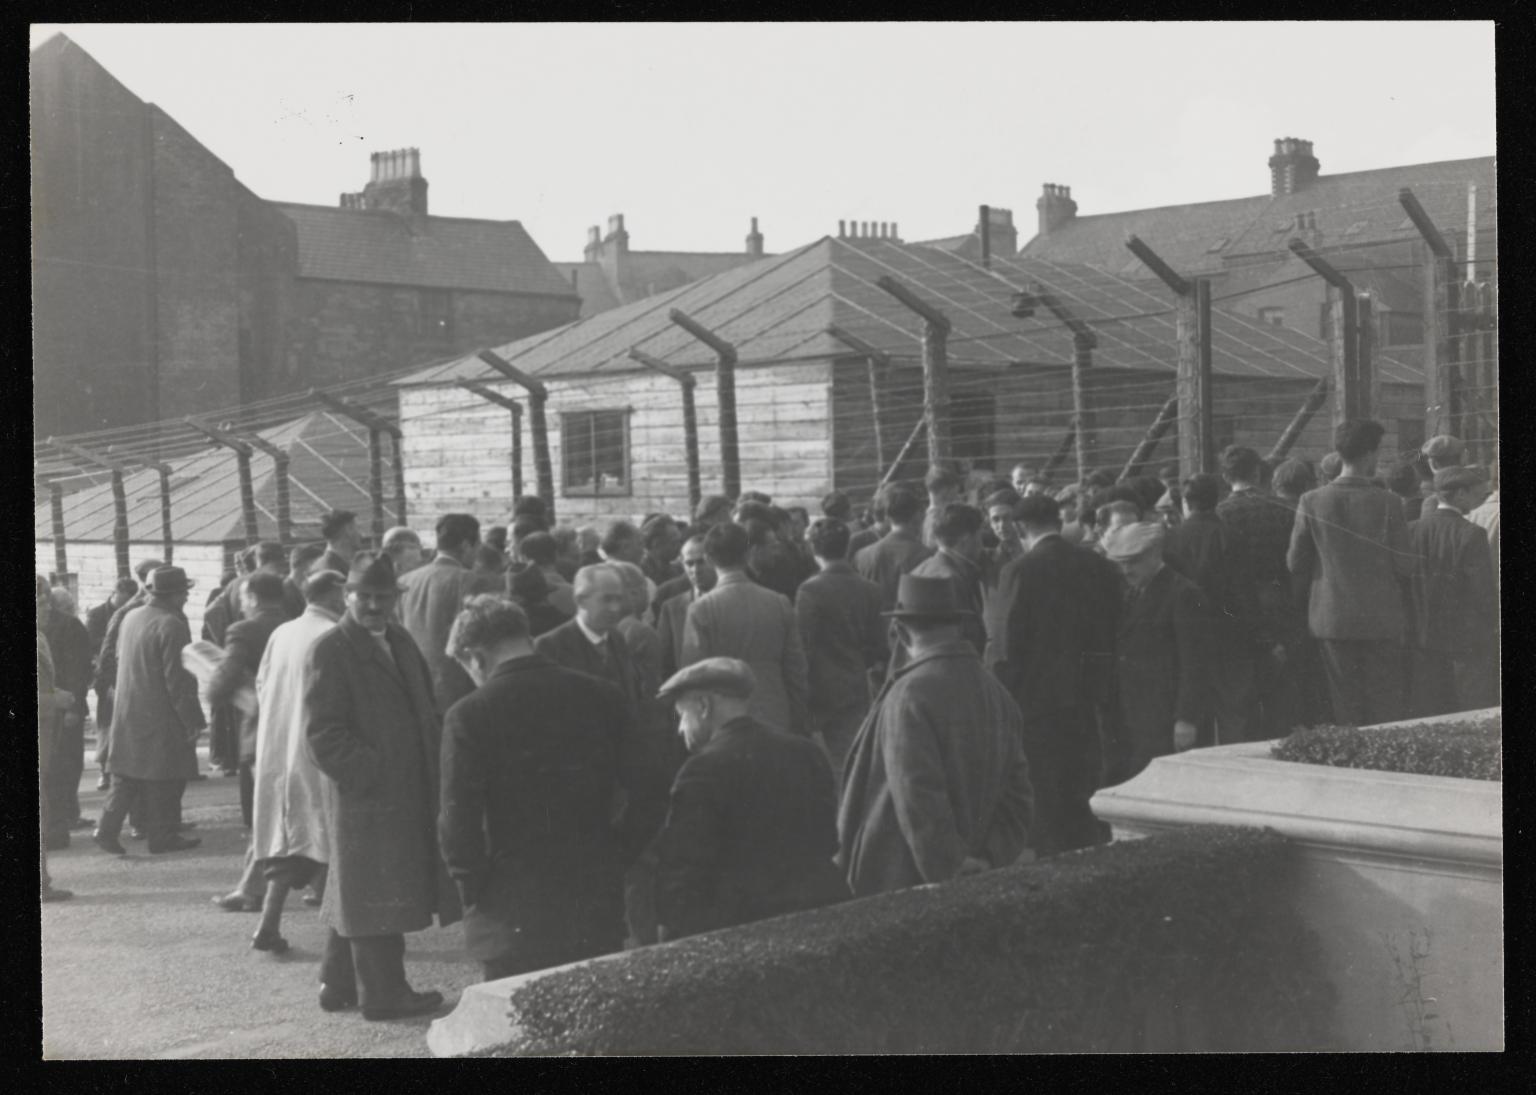 Photograph of internees in a yard at Hutchinson Internment Camp [c.1940-1] by Major H. O. Daniels